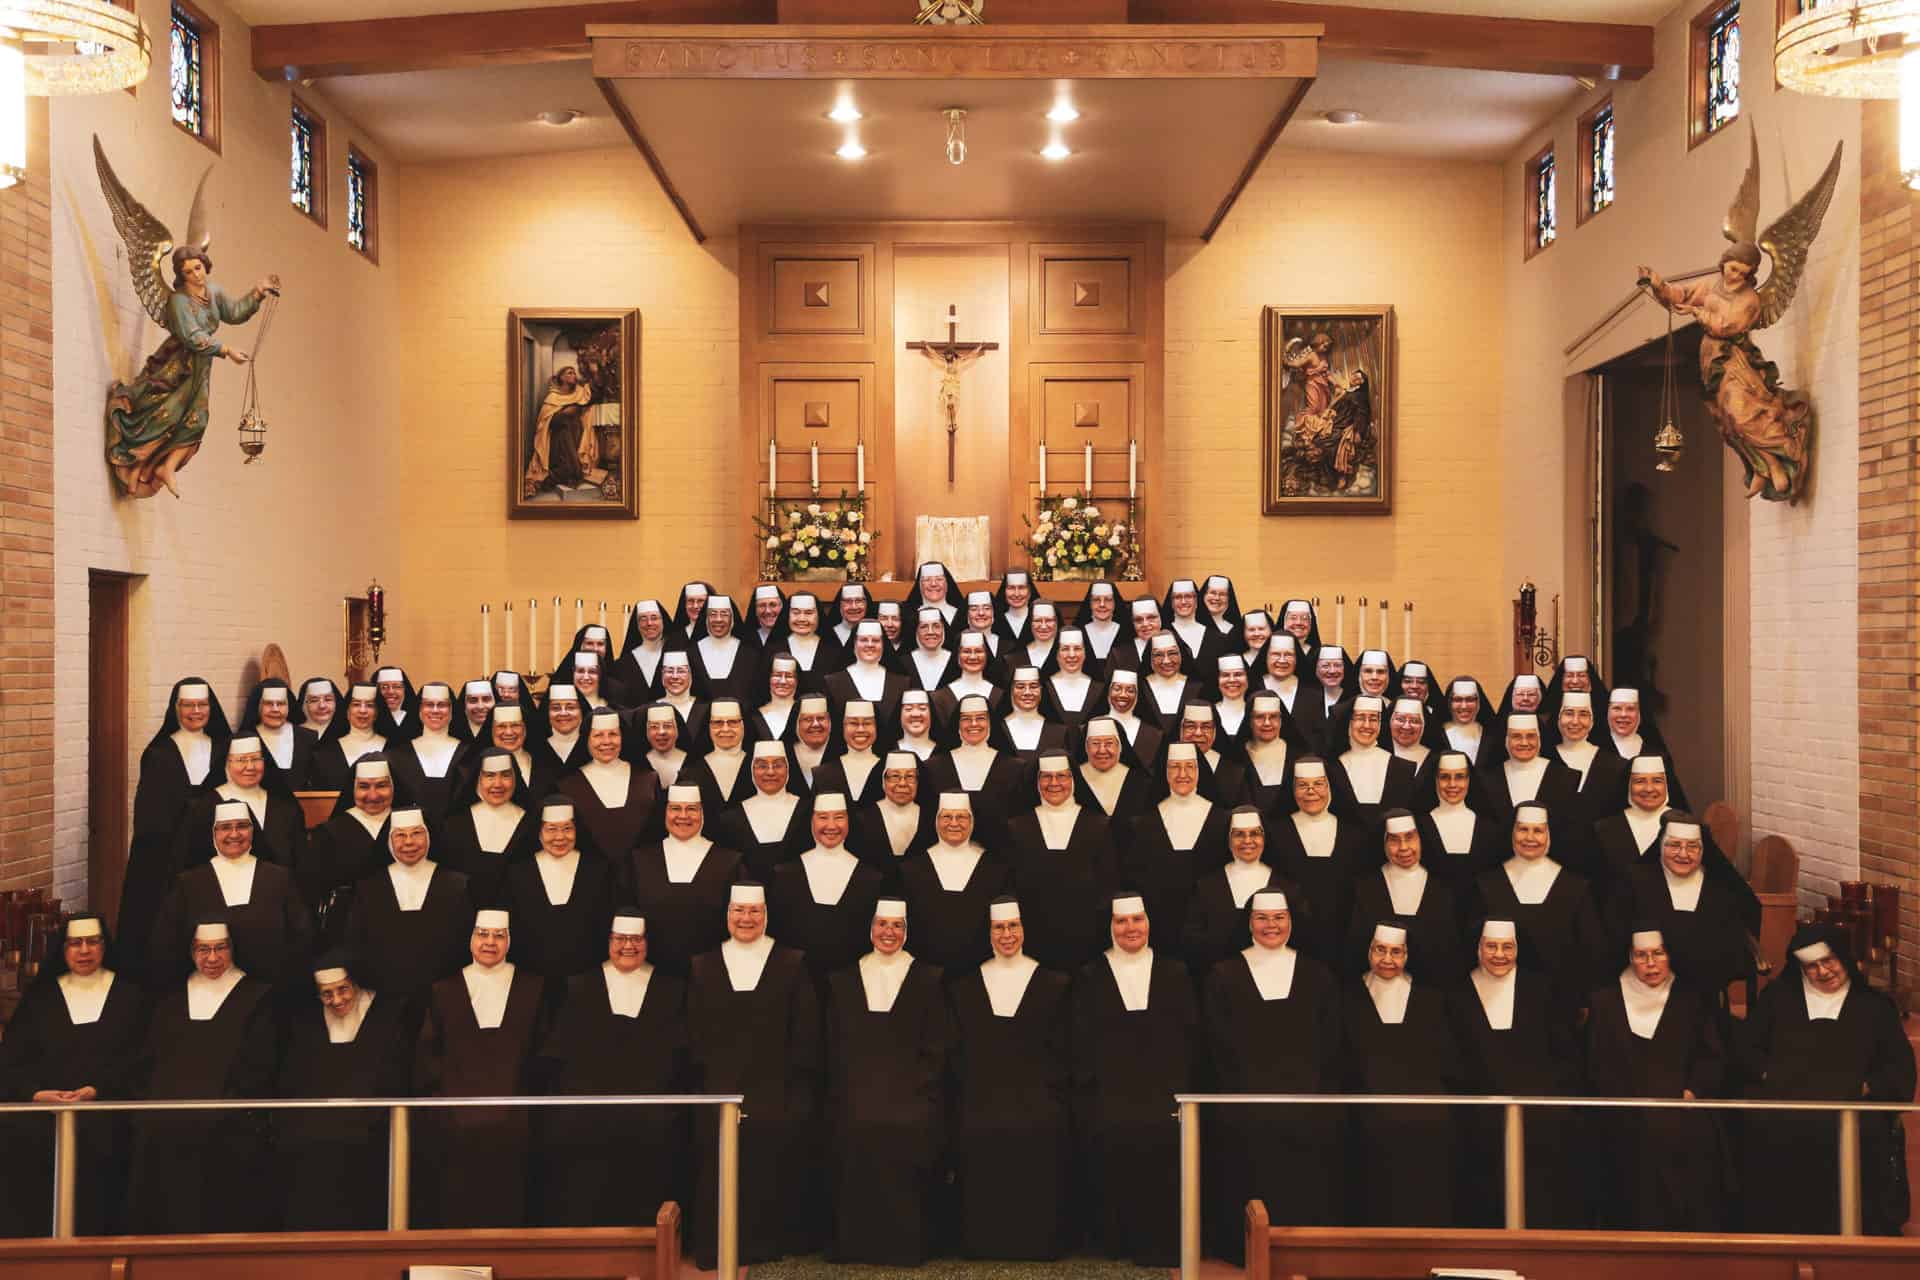 Community photo of Sisters in chapel